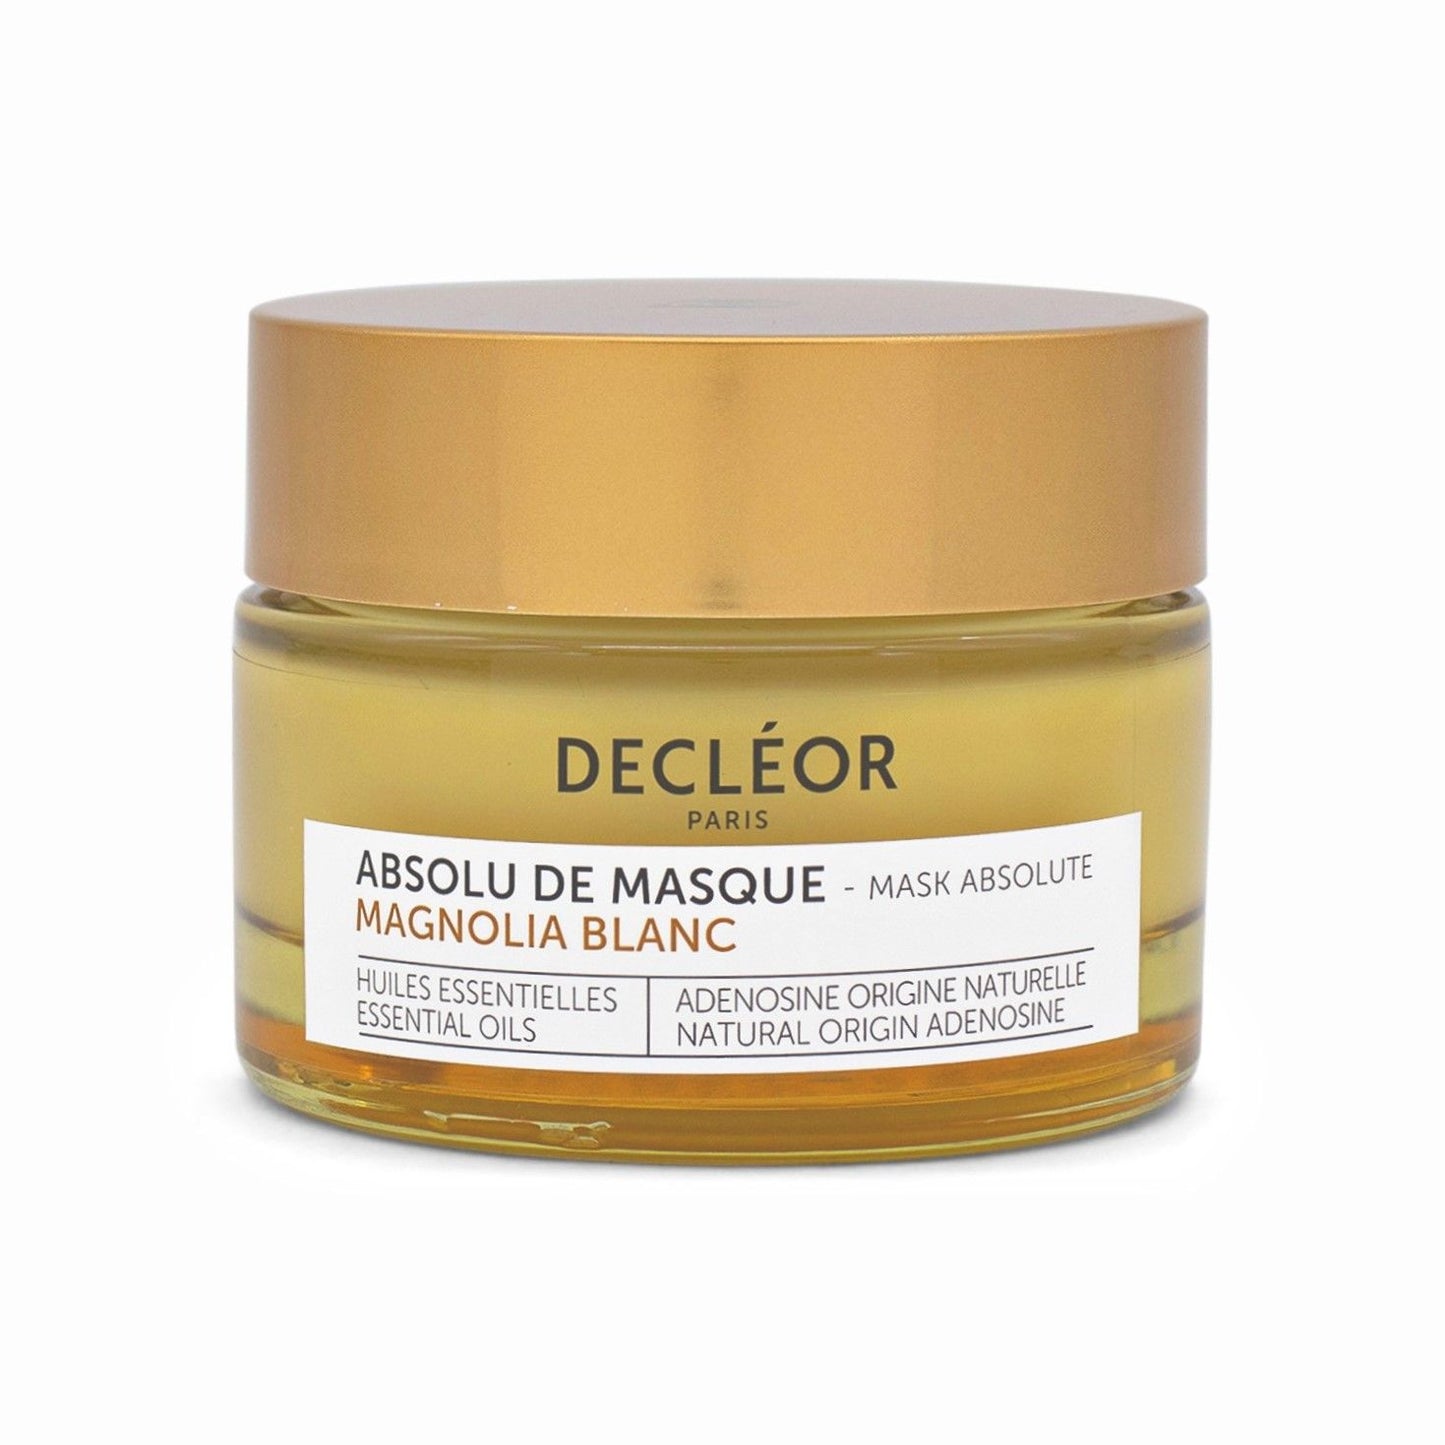 Decleor White Magnolia Plumping Mask Absolute 50ml - Imperfect Box